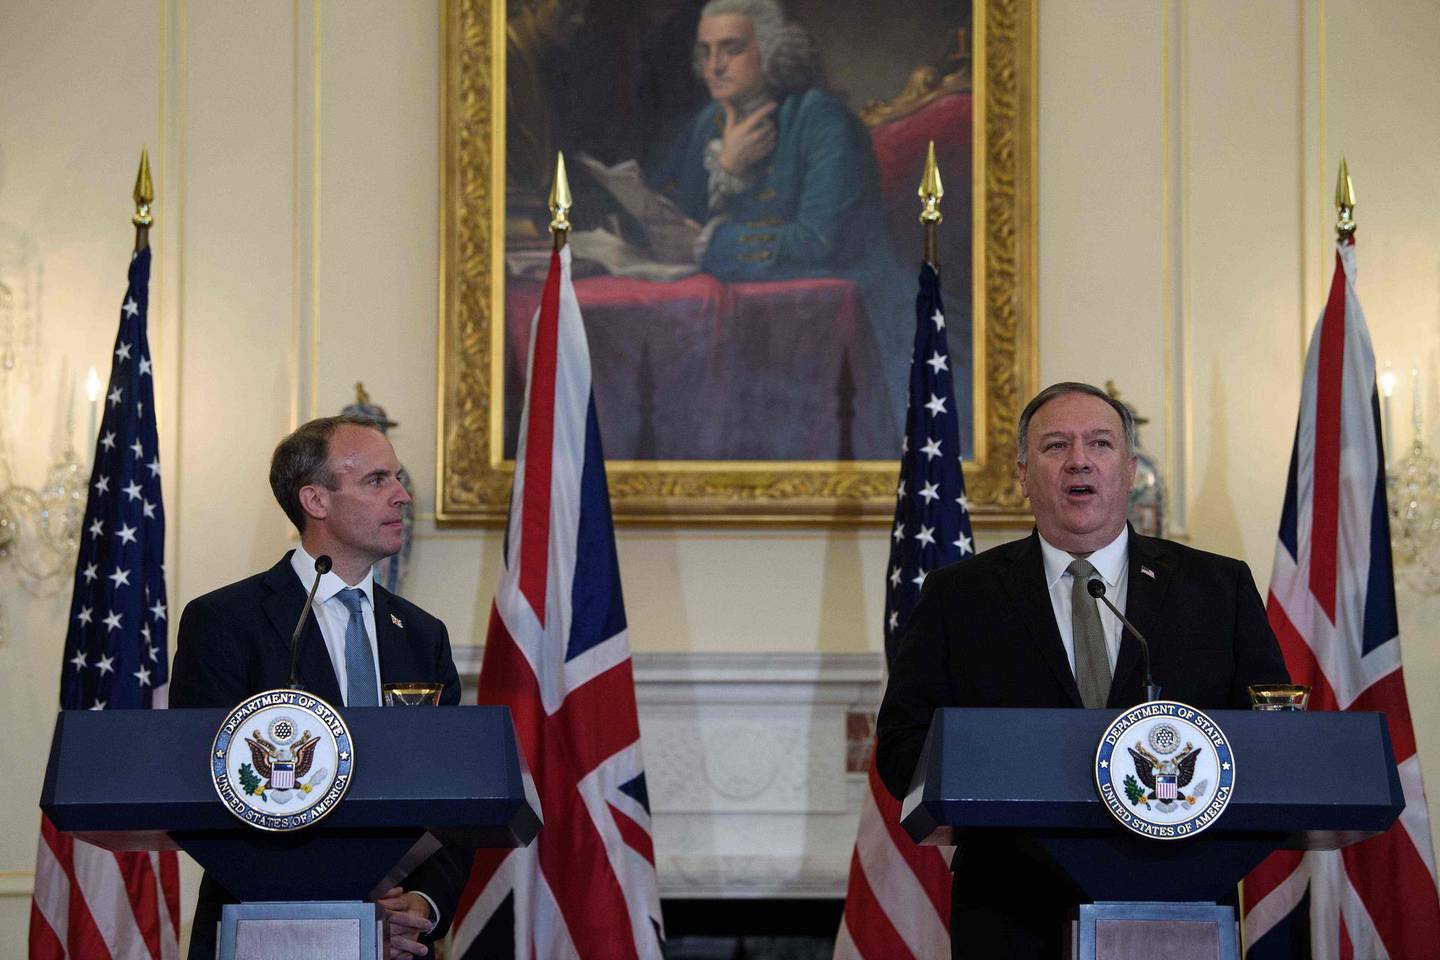 US Secretary of State Mike Pompeo (R) speaks at a press conference with British Foreign Secretary Dominic Raab at the State Department in Washington, DC, on September 16, 2020. / AFP / POOL / NICHOLAS KAMM
